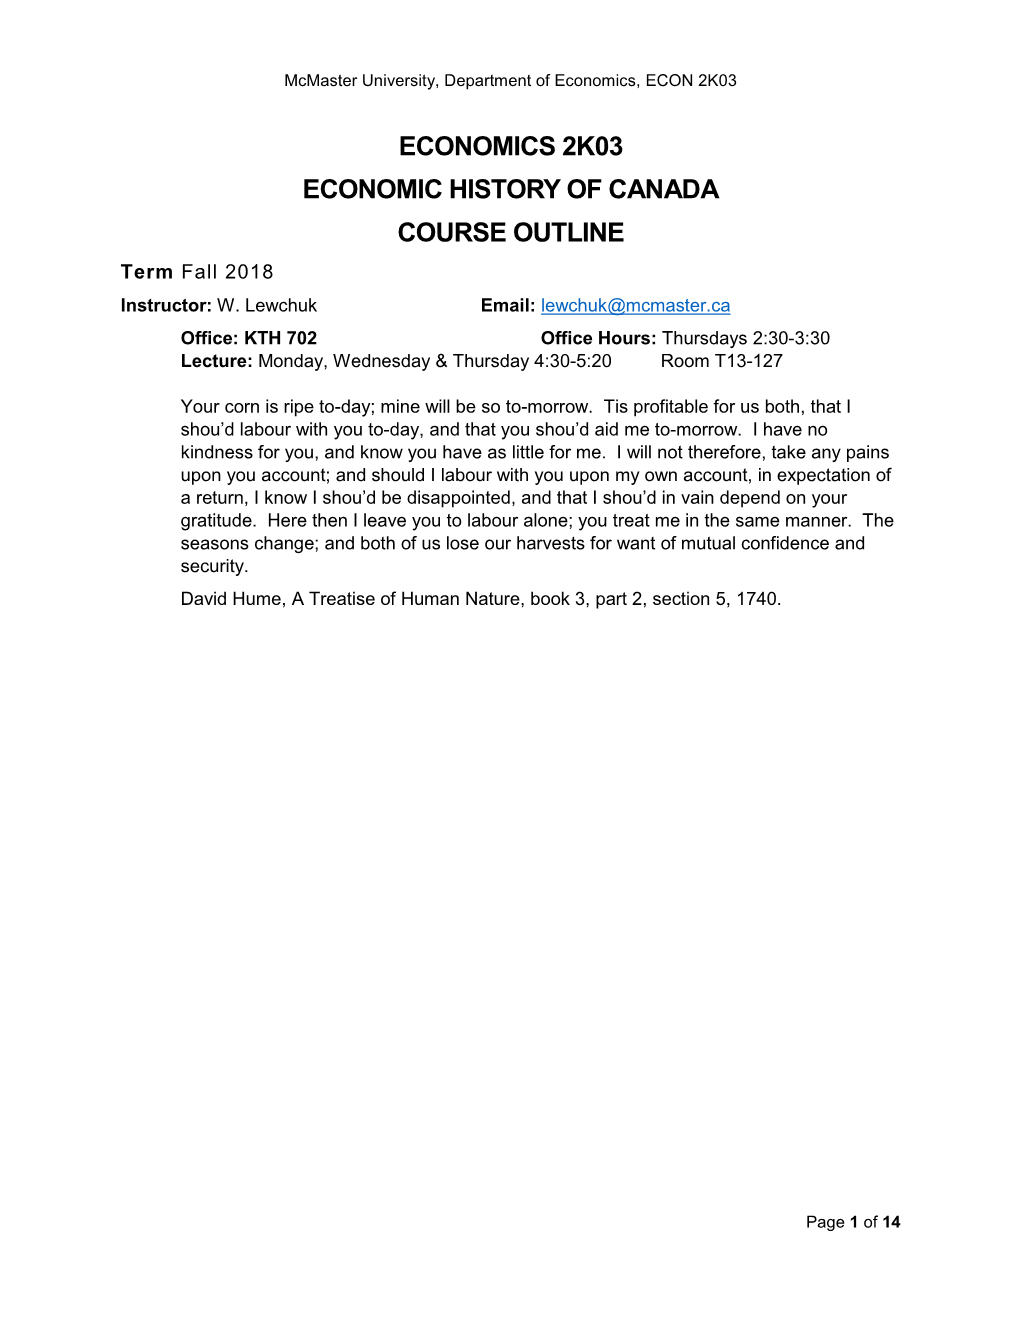 ECONOMICS 2K03 ECONOMIC HISTORY of CANADA COURSE OUTLINE Term Fall 2018 Instructor: W